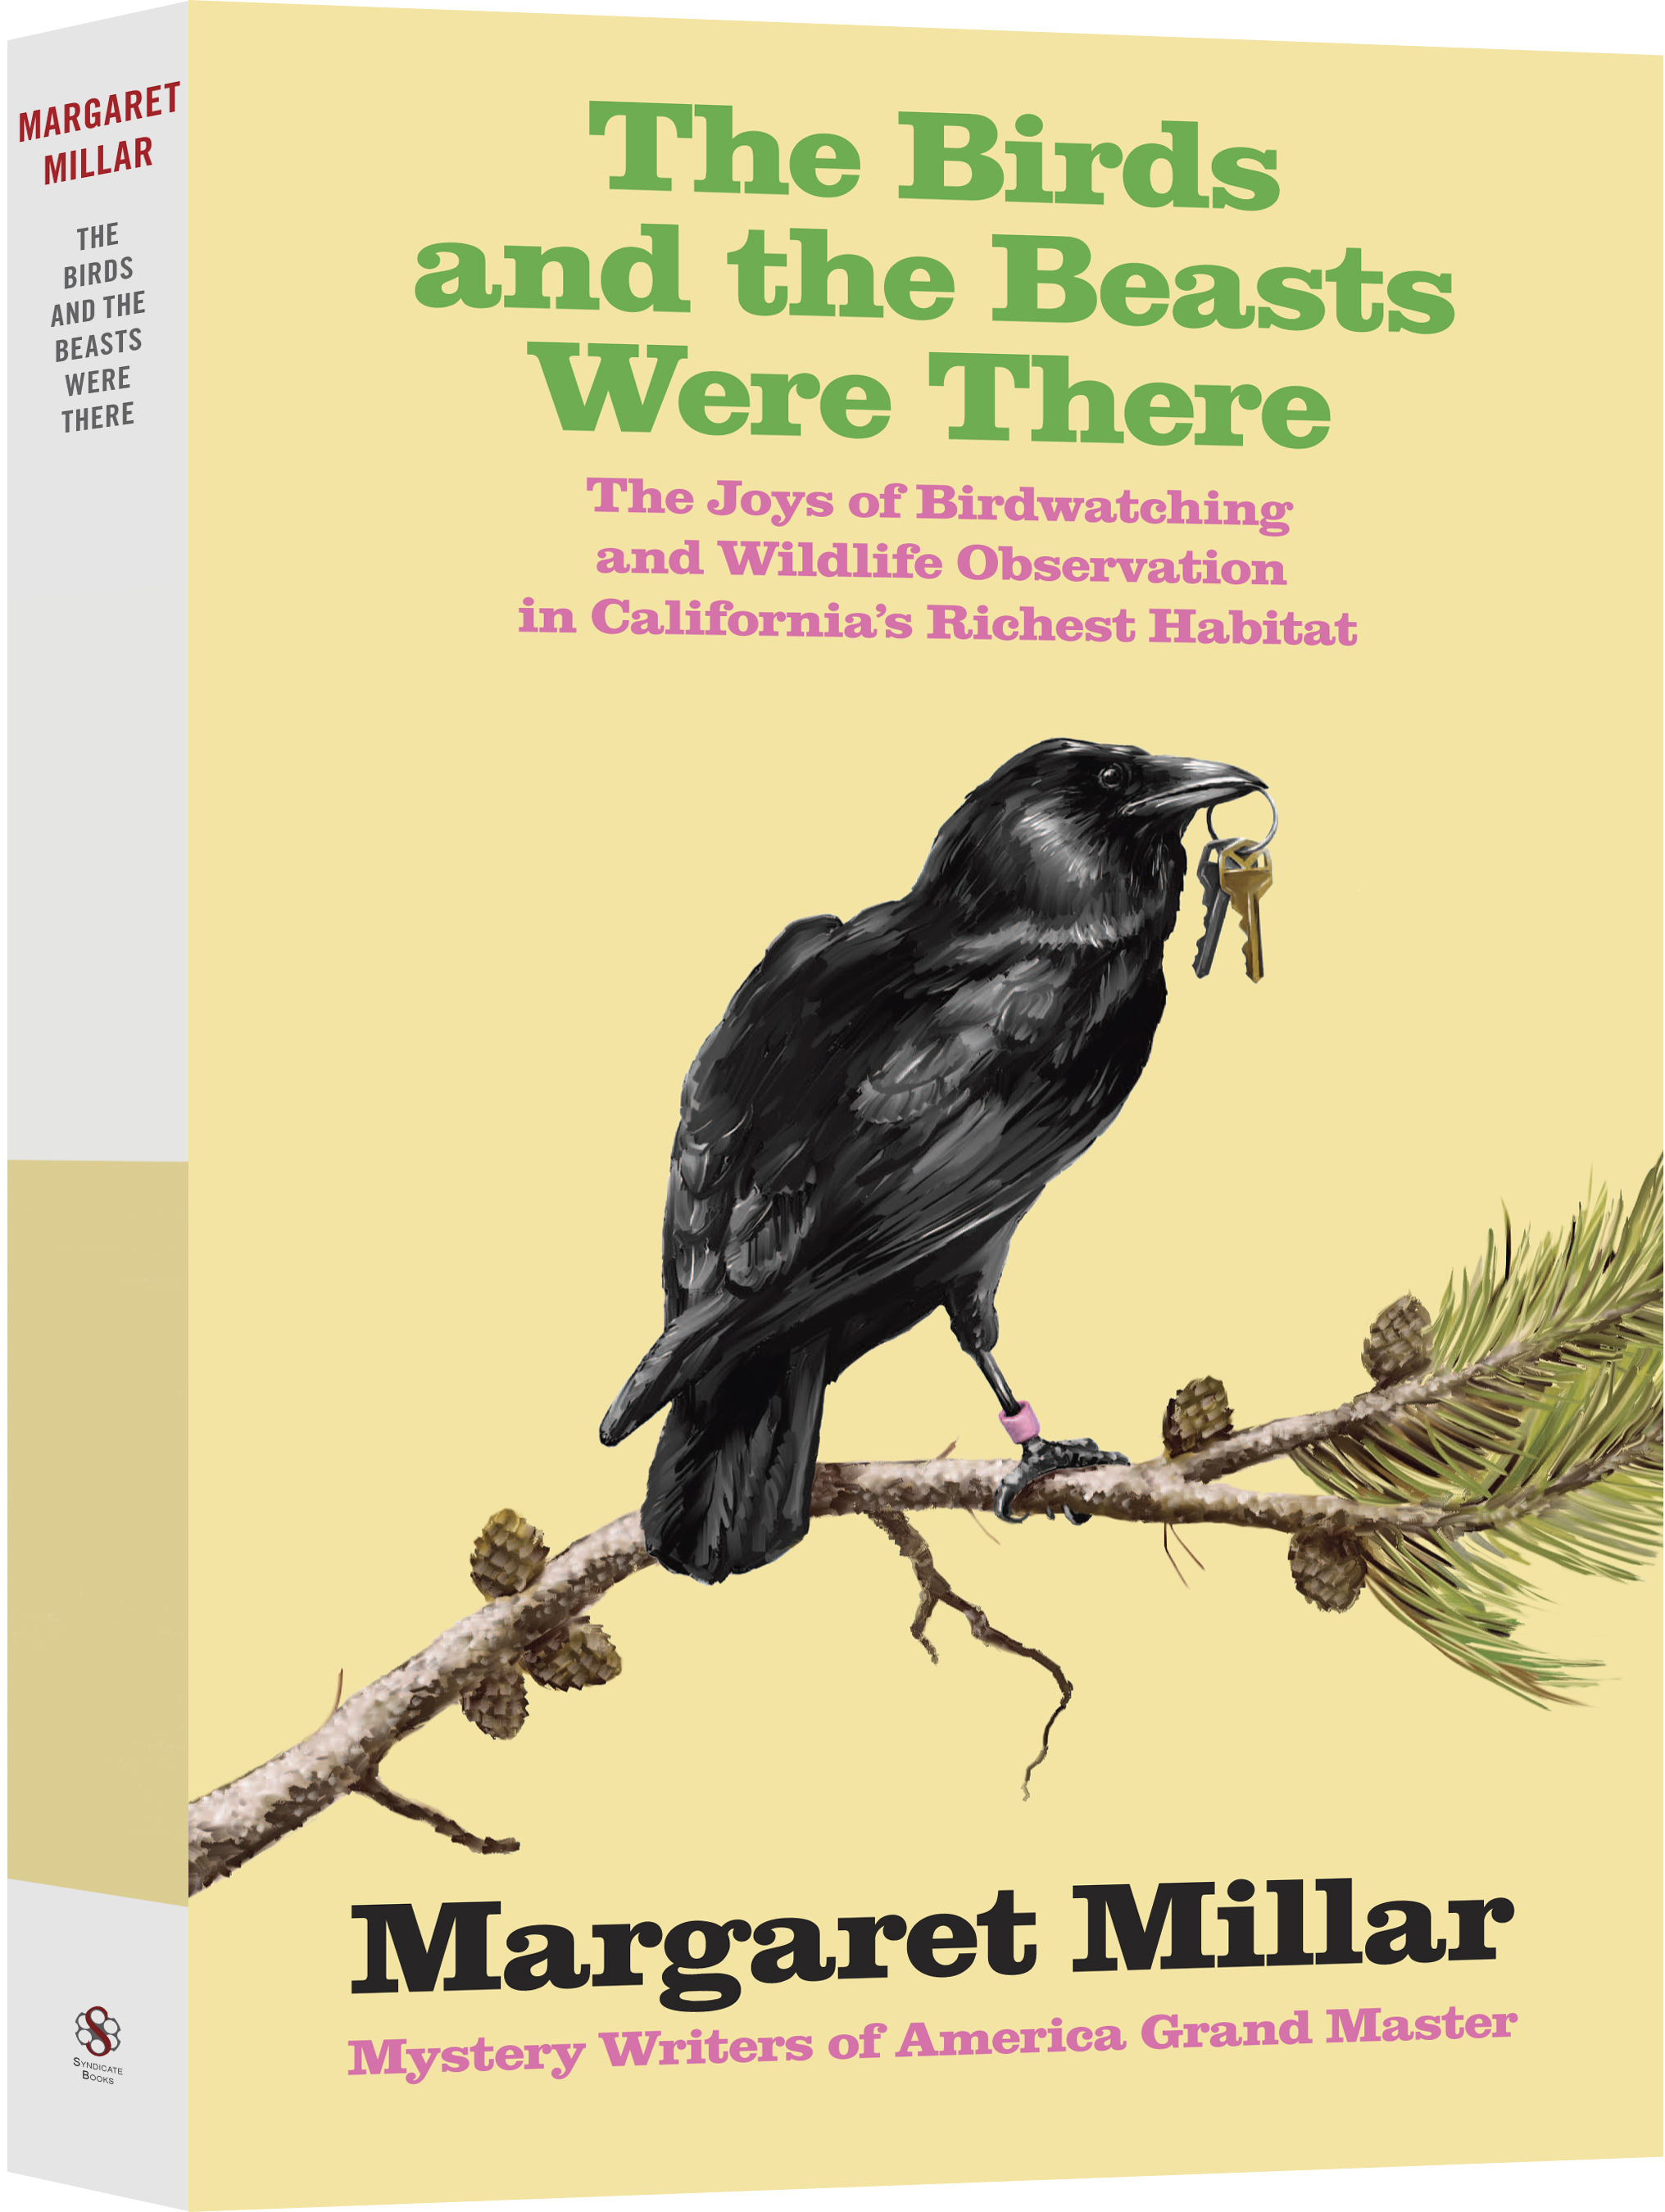 COLLECTED MILLAR: THE BIRDS AND BEASTS WERE THERE: THE JOYS OF BIRDWATCHING AND WILDLIFE OBSERVATIONS IN CALIFORNIA'S RICHEST HABITAT